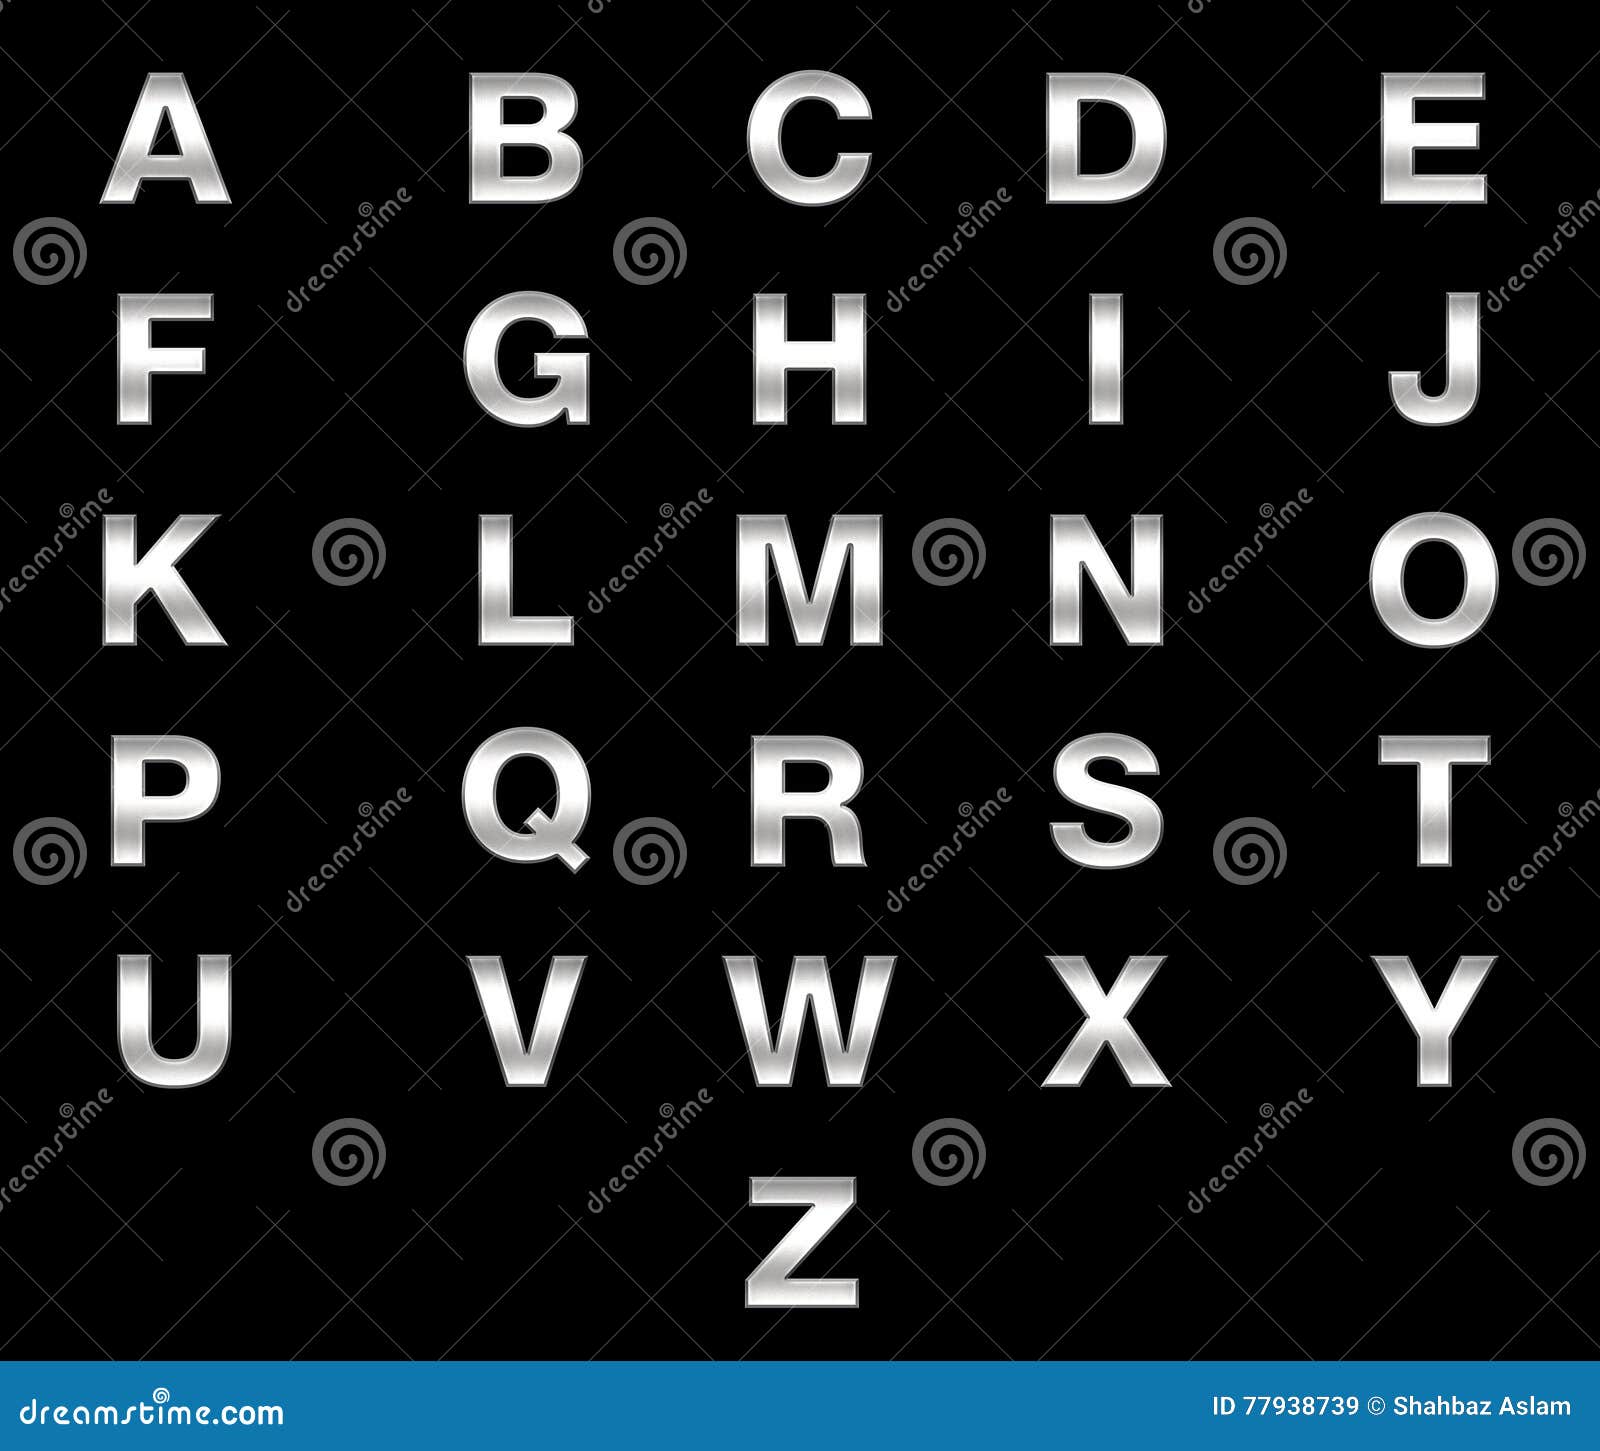 Letters A B C D E F G H I J K L M N O P Q R S T U V W X Y Z Alphabets In Matel 3d Texture Style Isolated On Black Background Stock Illustration Illustration Of Paint Alphabets